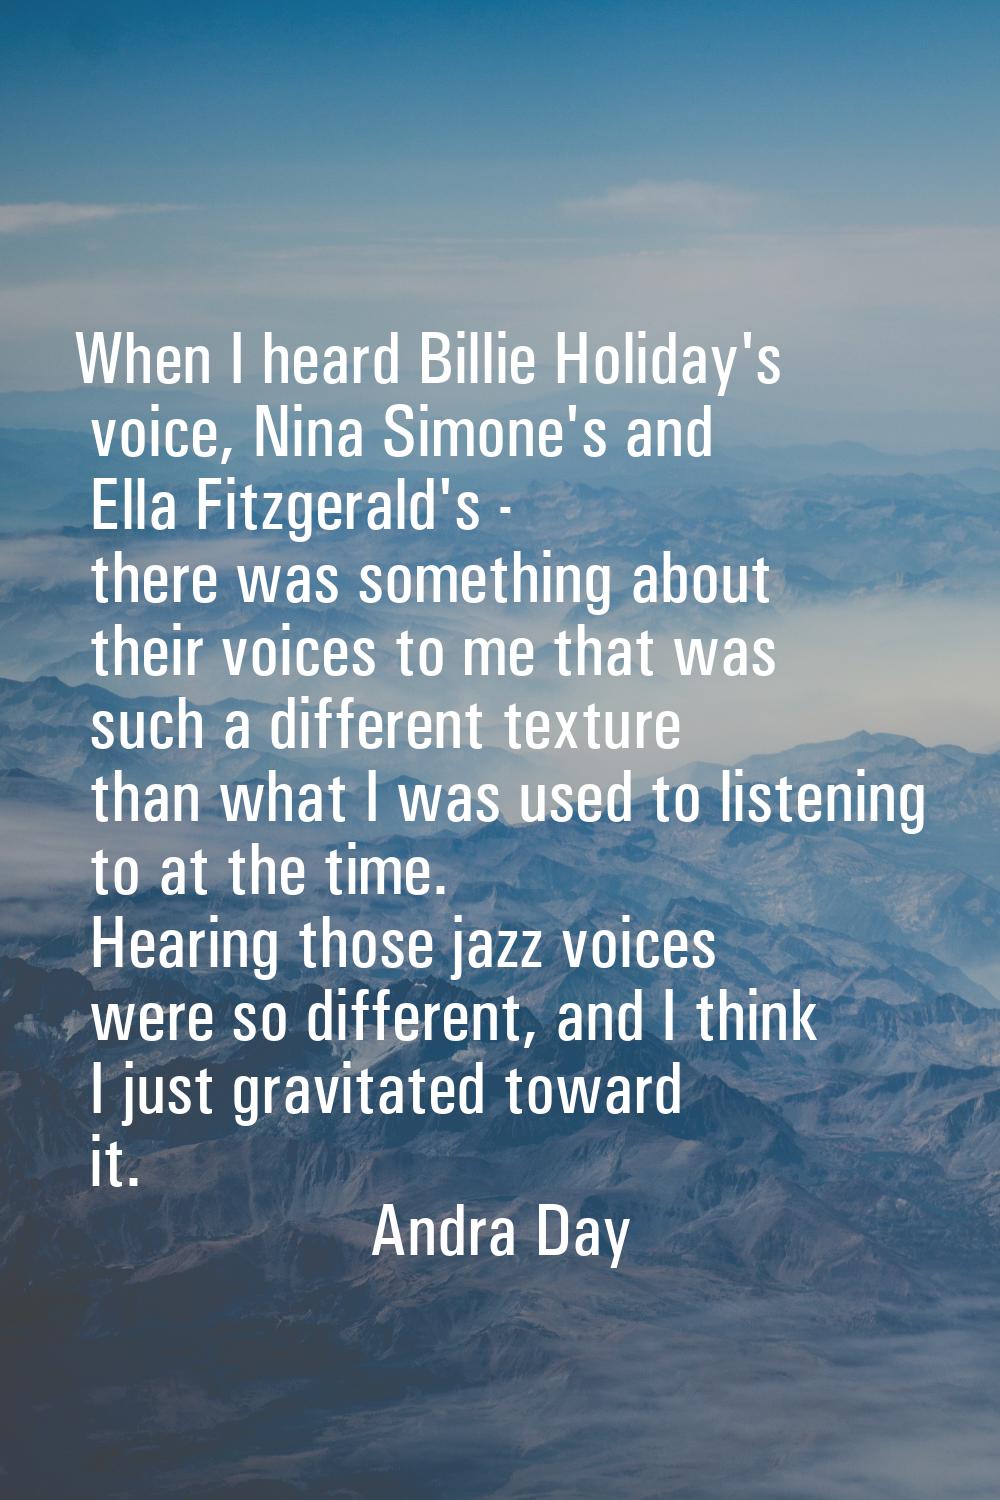 When I heard Billie Holiday's voice, Nina Simone's and Ella Fitzgerald's - there was something abou